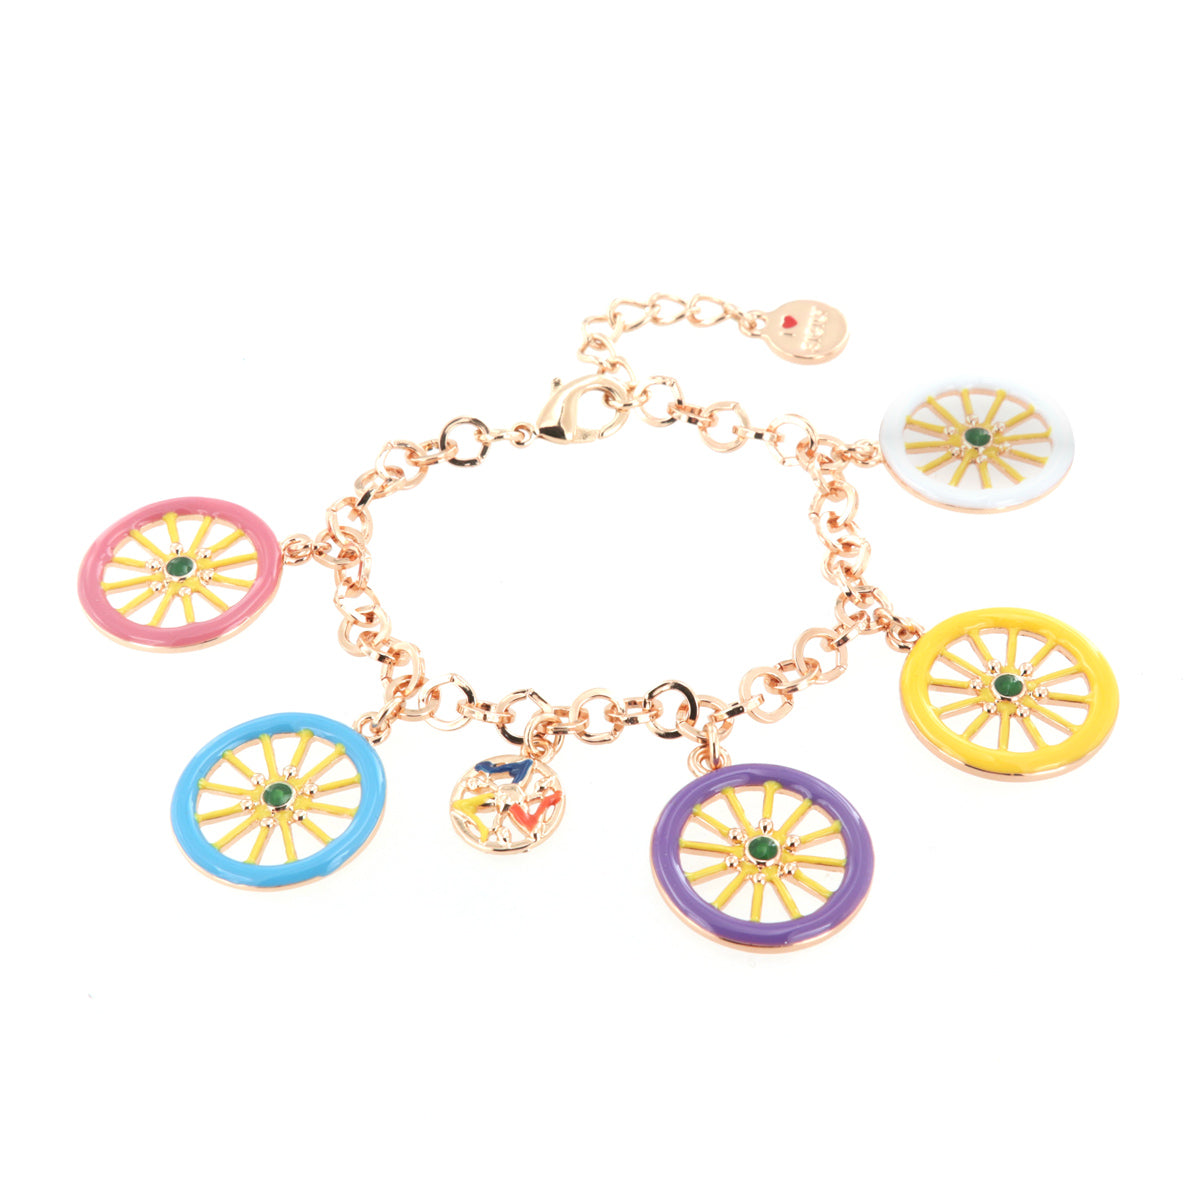 Metal bracelet with charm colored wheels and Sicilian cart